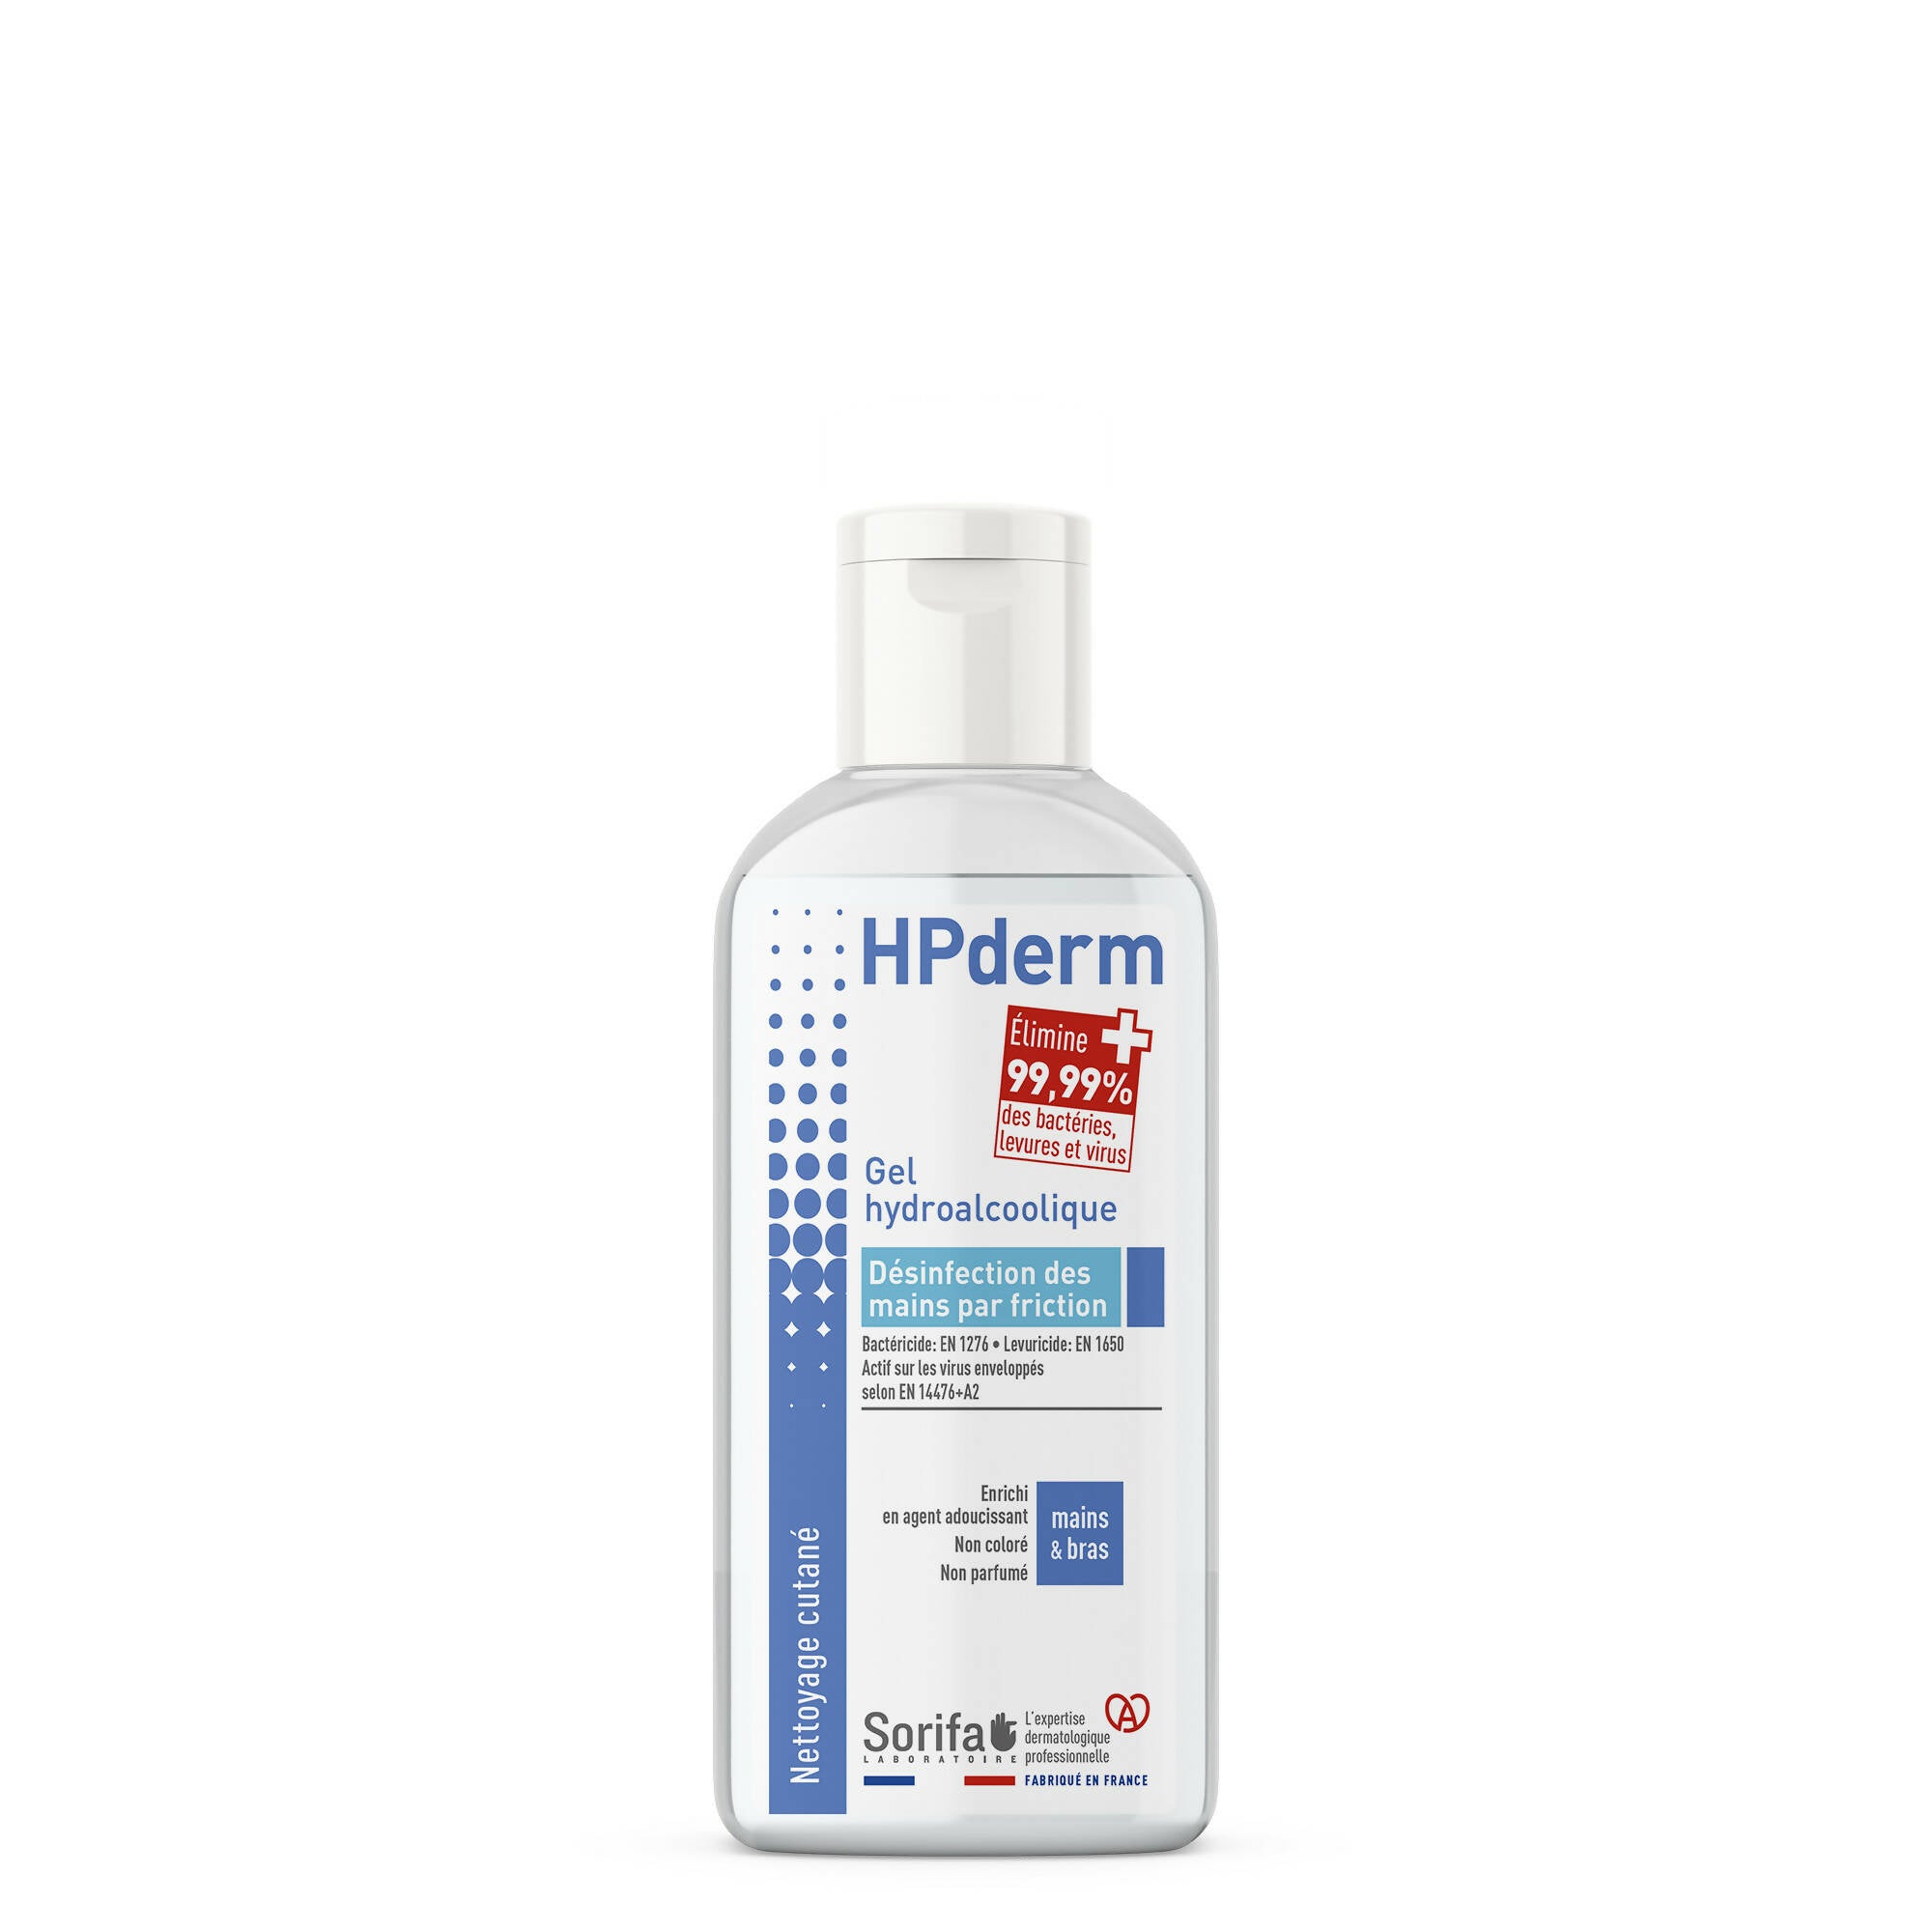 SORIFA - Pack of 10 - HPderm Hydroalcoholic gel for hand disinfection - 100 ml bottle - 0